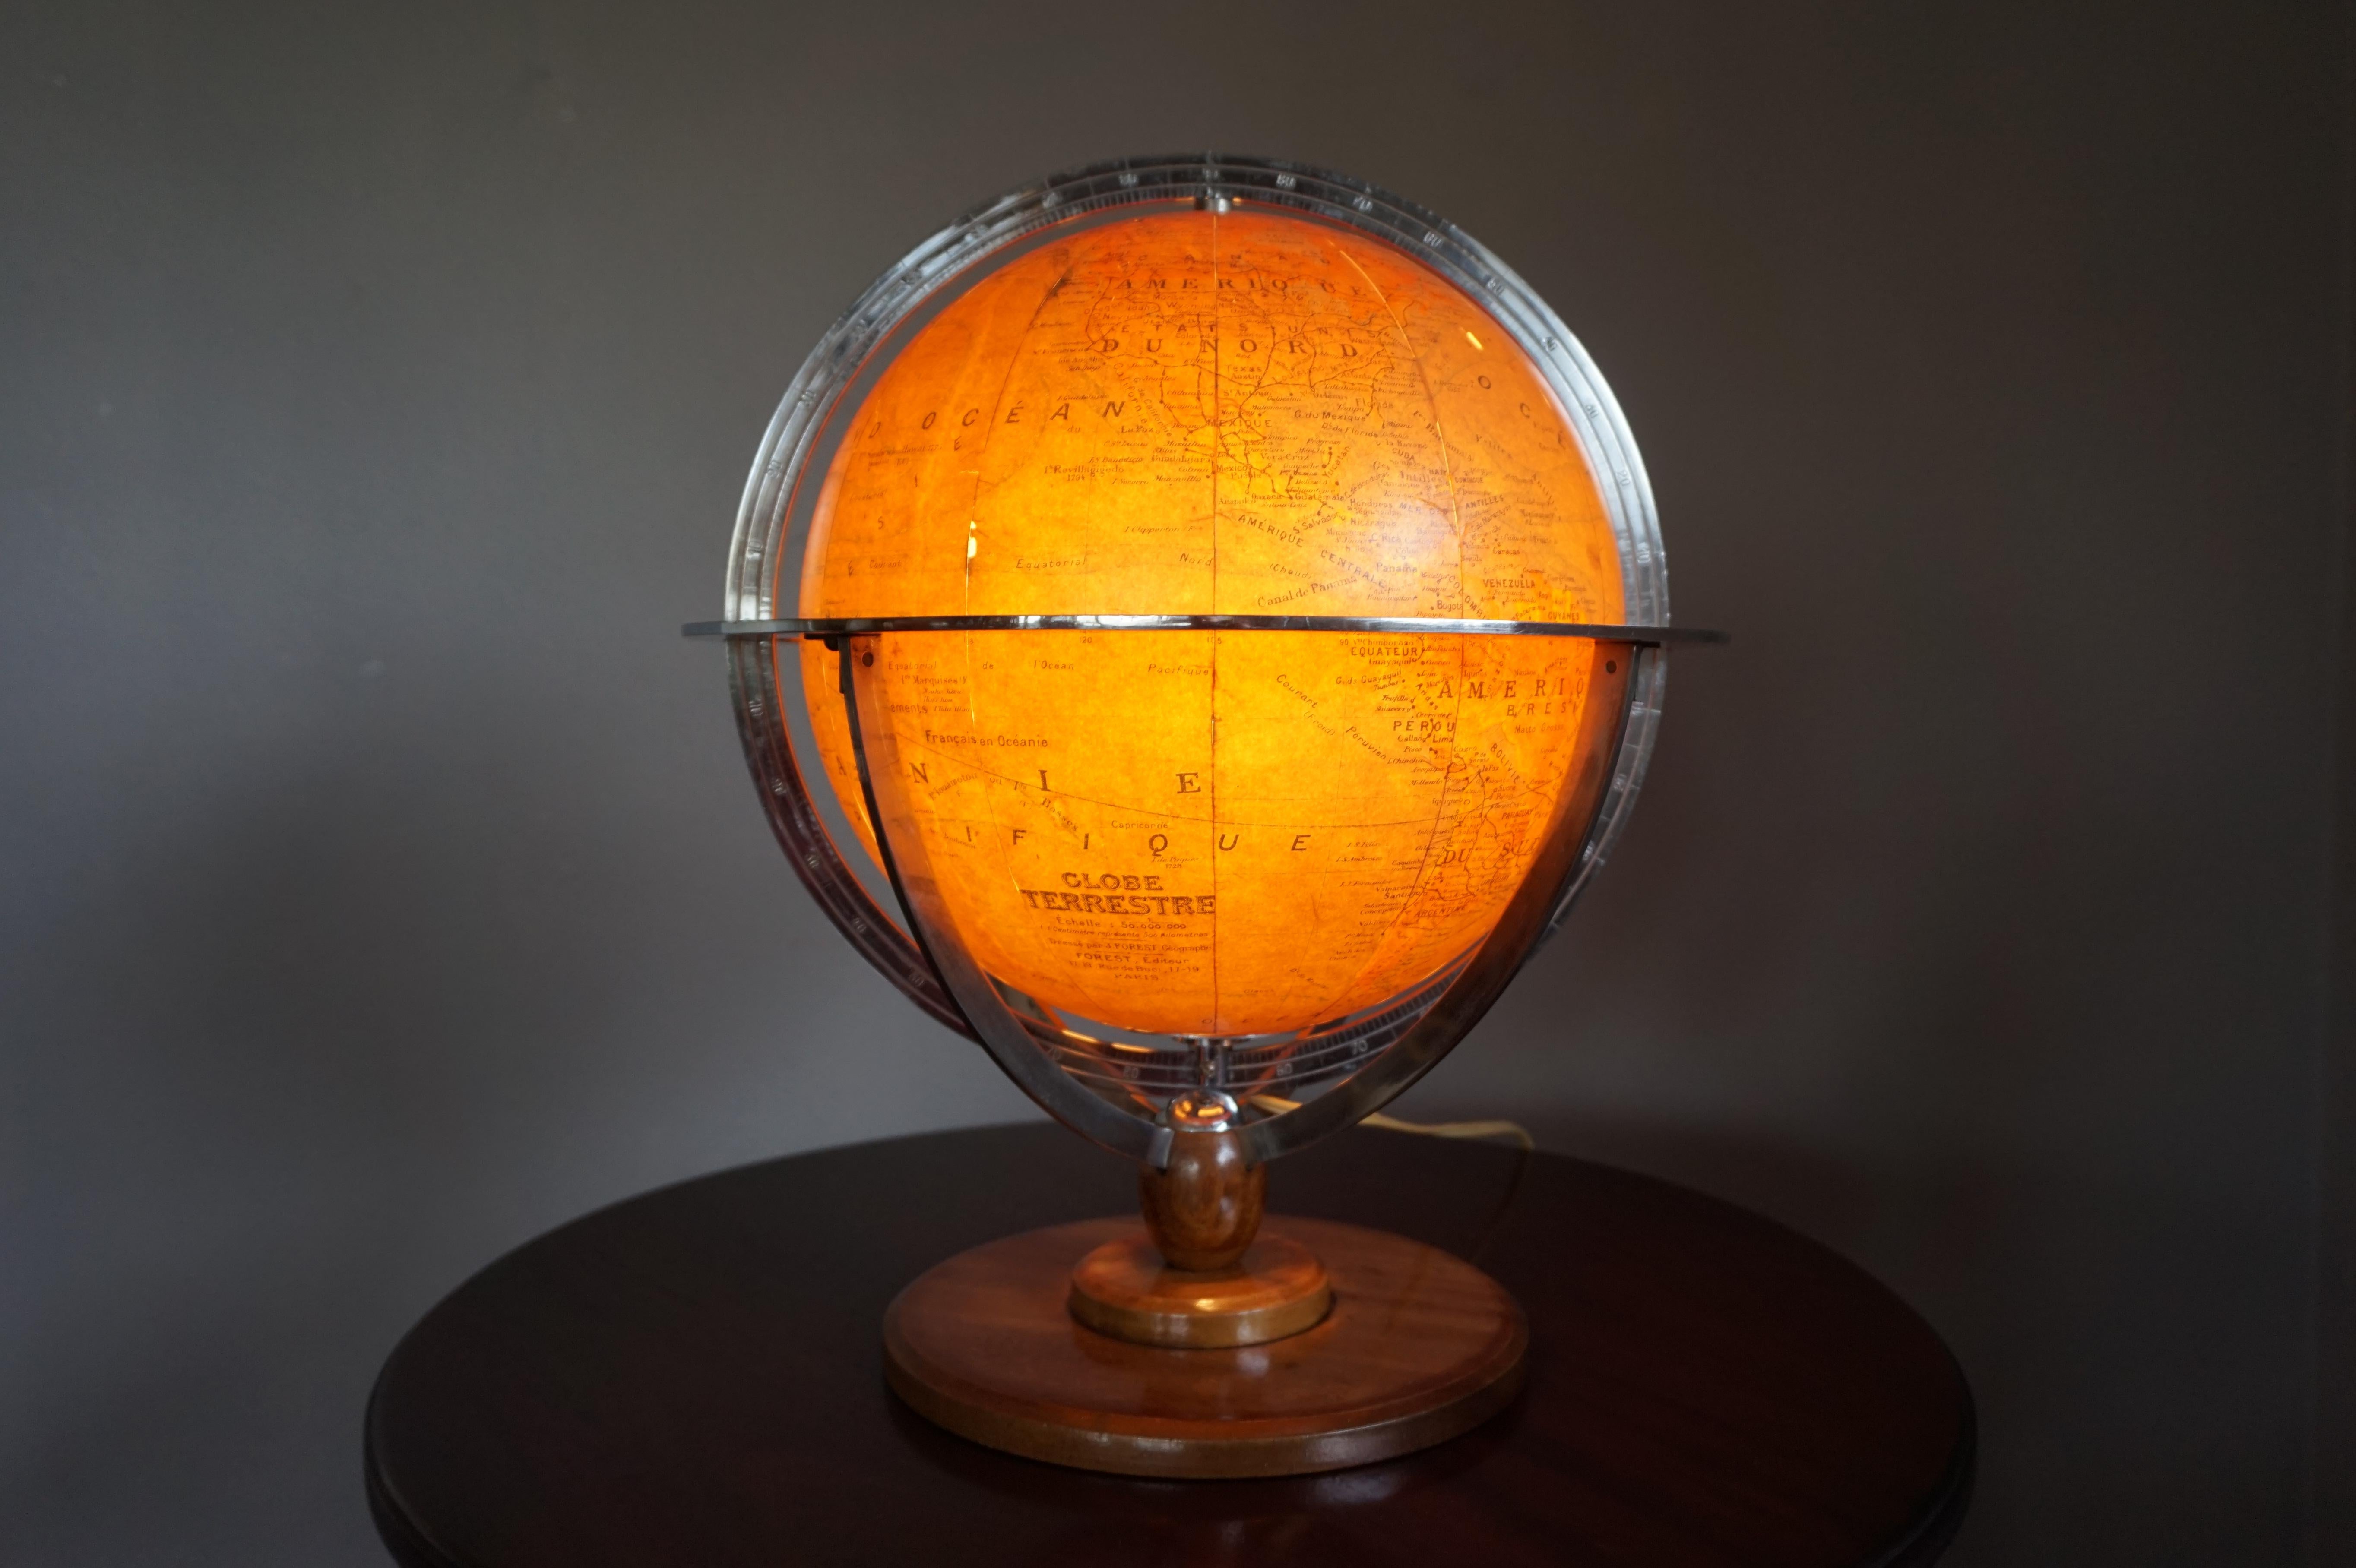 Cast Stylish Mid-20th Century Made, Parisian Terrestrial Desk / Table Globe with Lamp For Sale